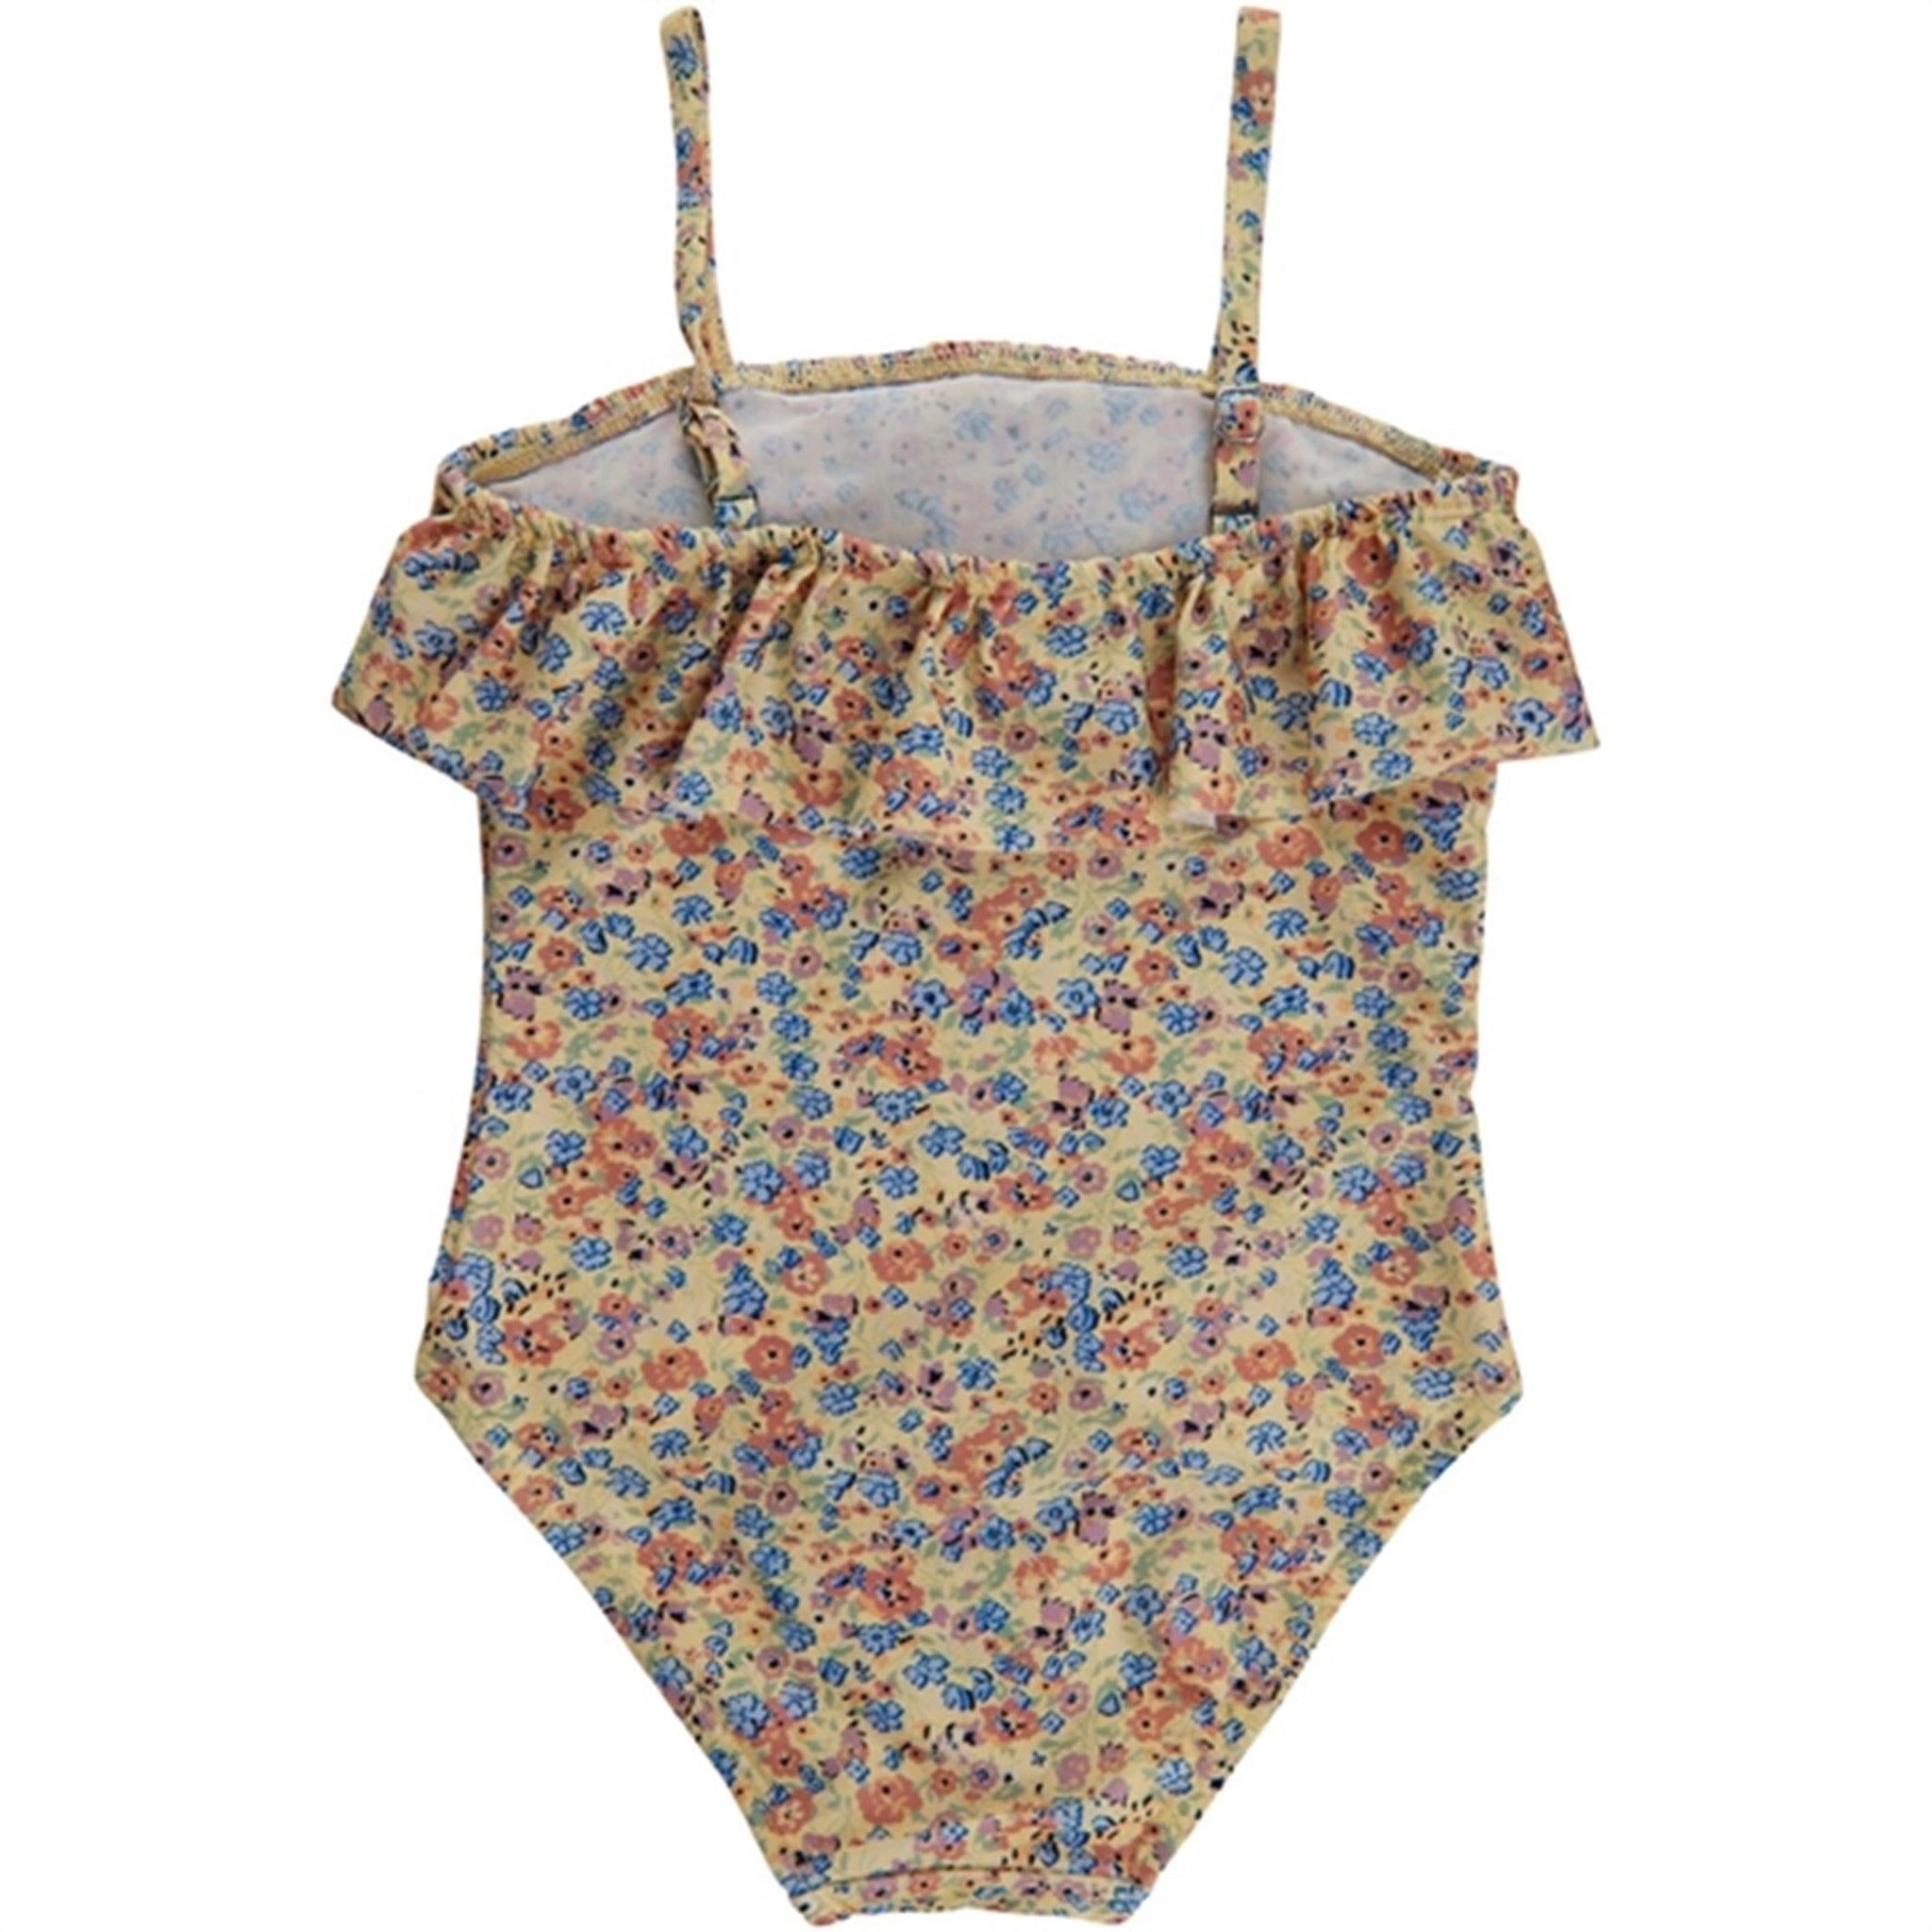 THE NEW Flower AOP Fally Swimsuit 2